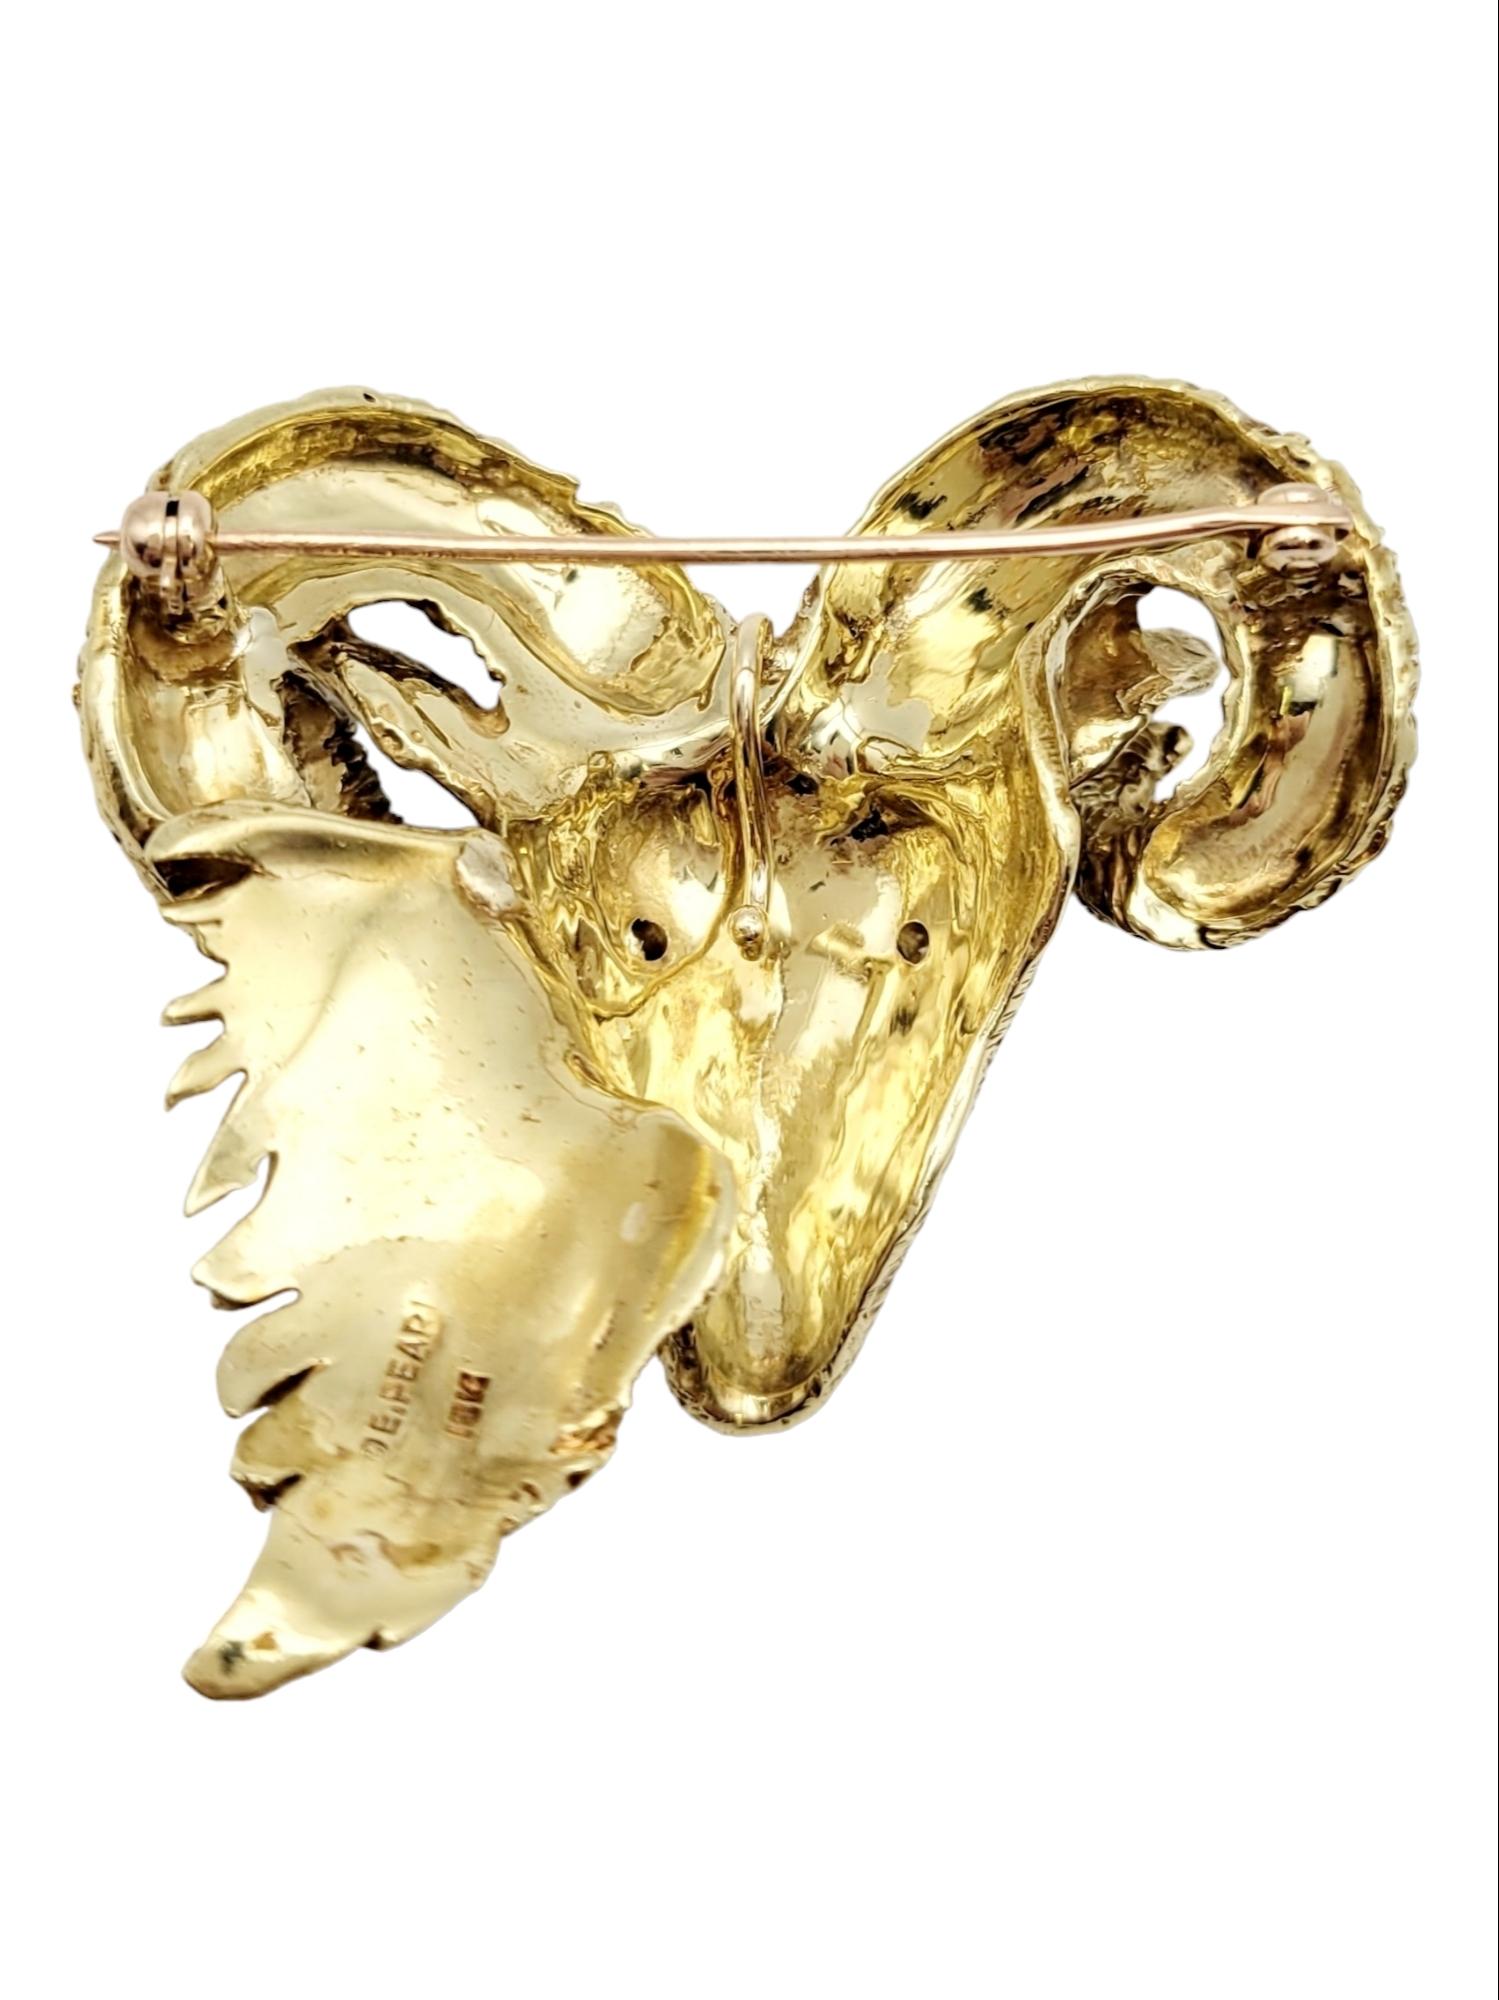 Contemporary Vintage Erwin Pearl Ram's Head Brooch Pendant with Diamond Eyes in 18 Karat Gold For Sale